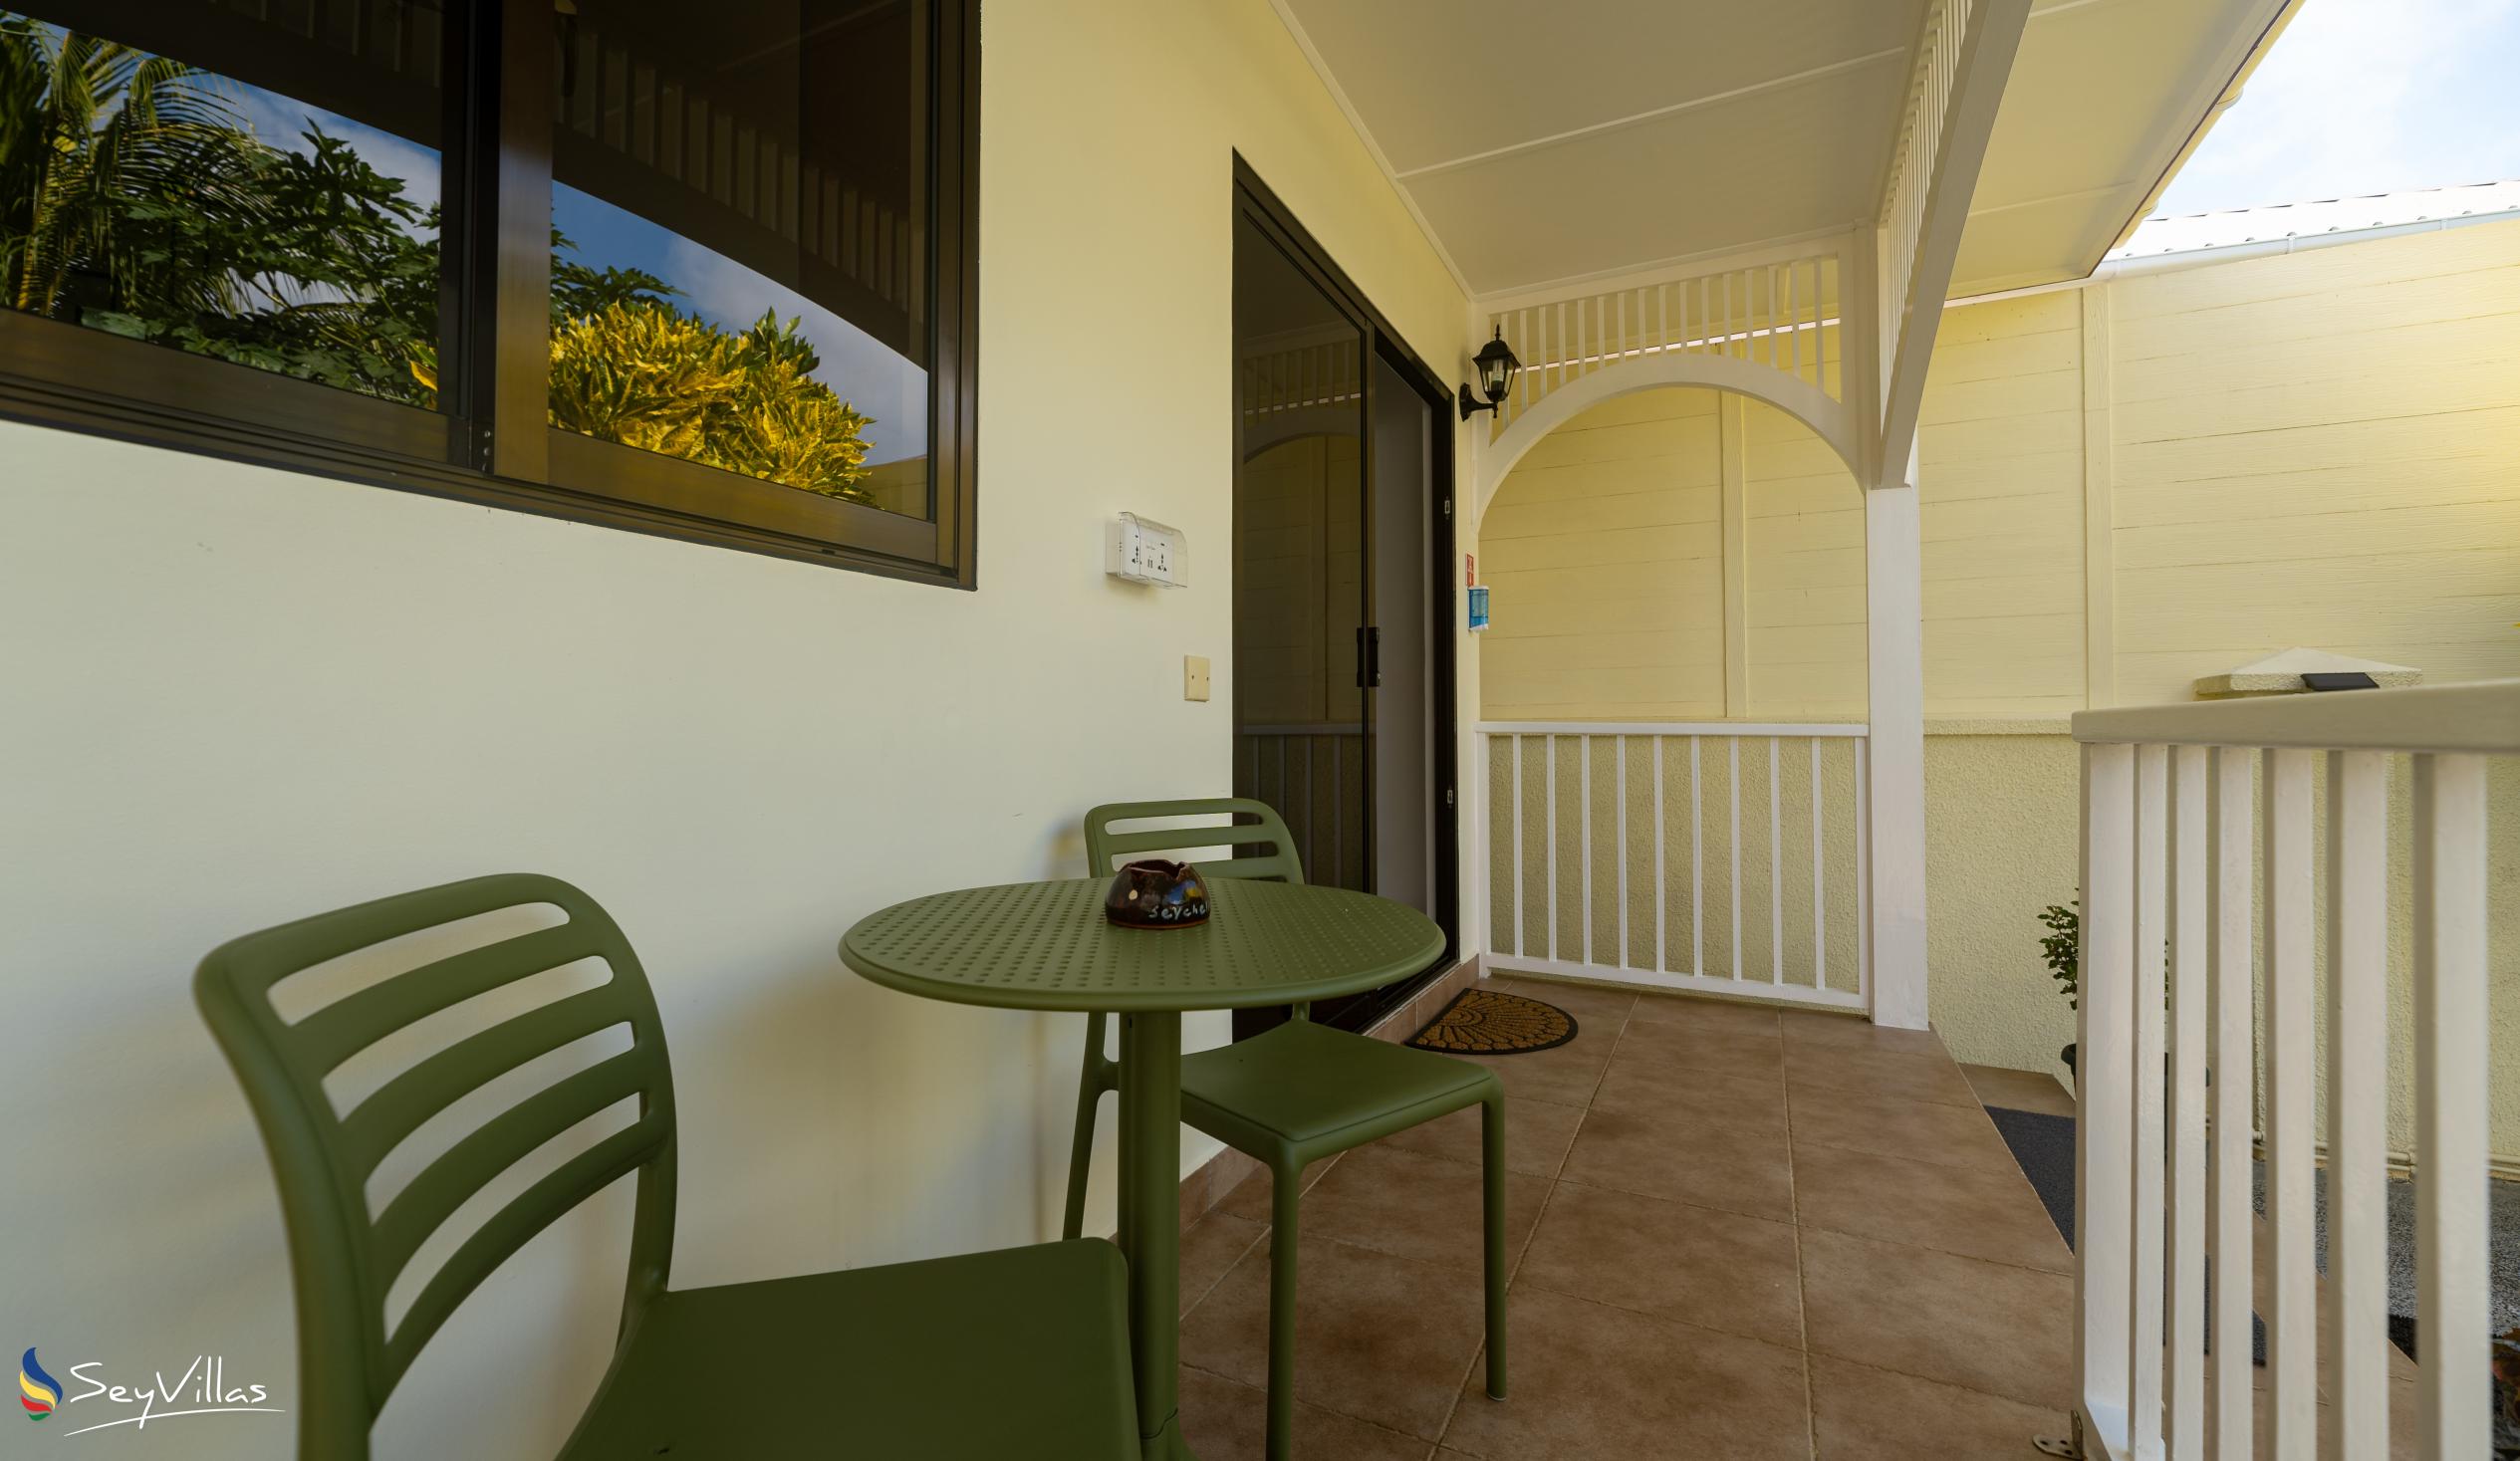 Foto 48: Emma's Guest House and Self-Catering - Villa 1 chambre - Mahé (Seychelles)